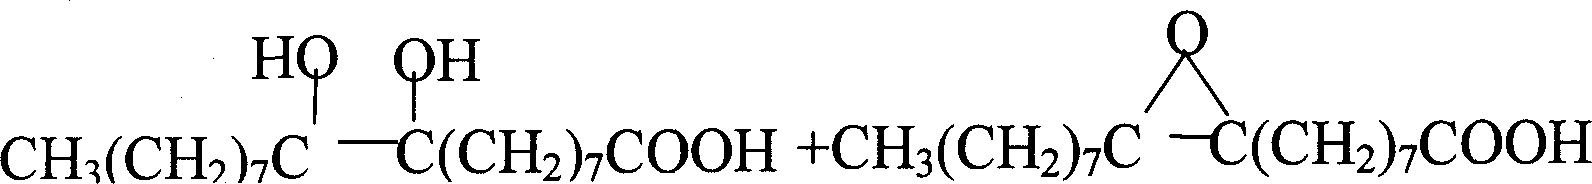 Process for preparing azelaic acid by oleic acid phase transfer catalytic oxidation